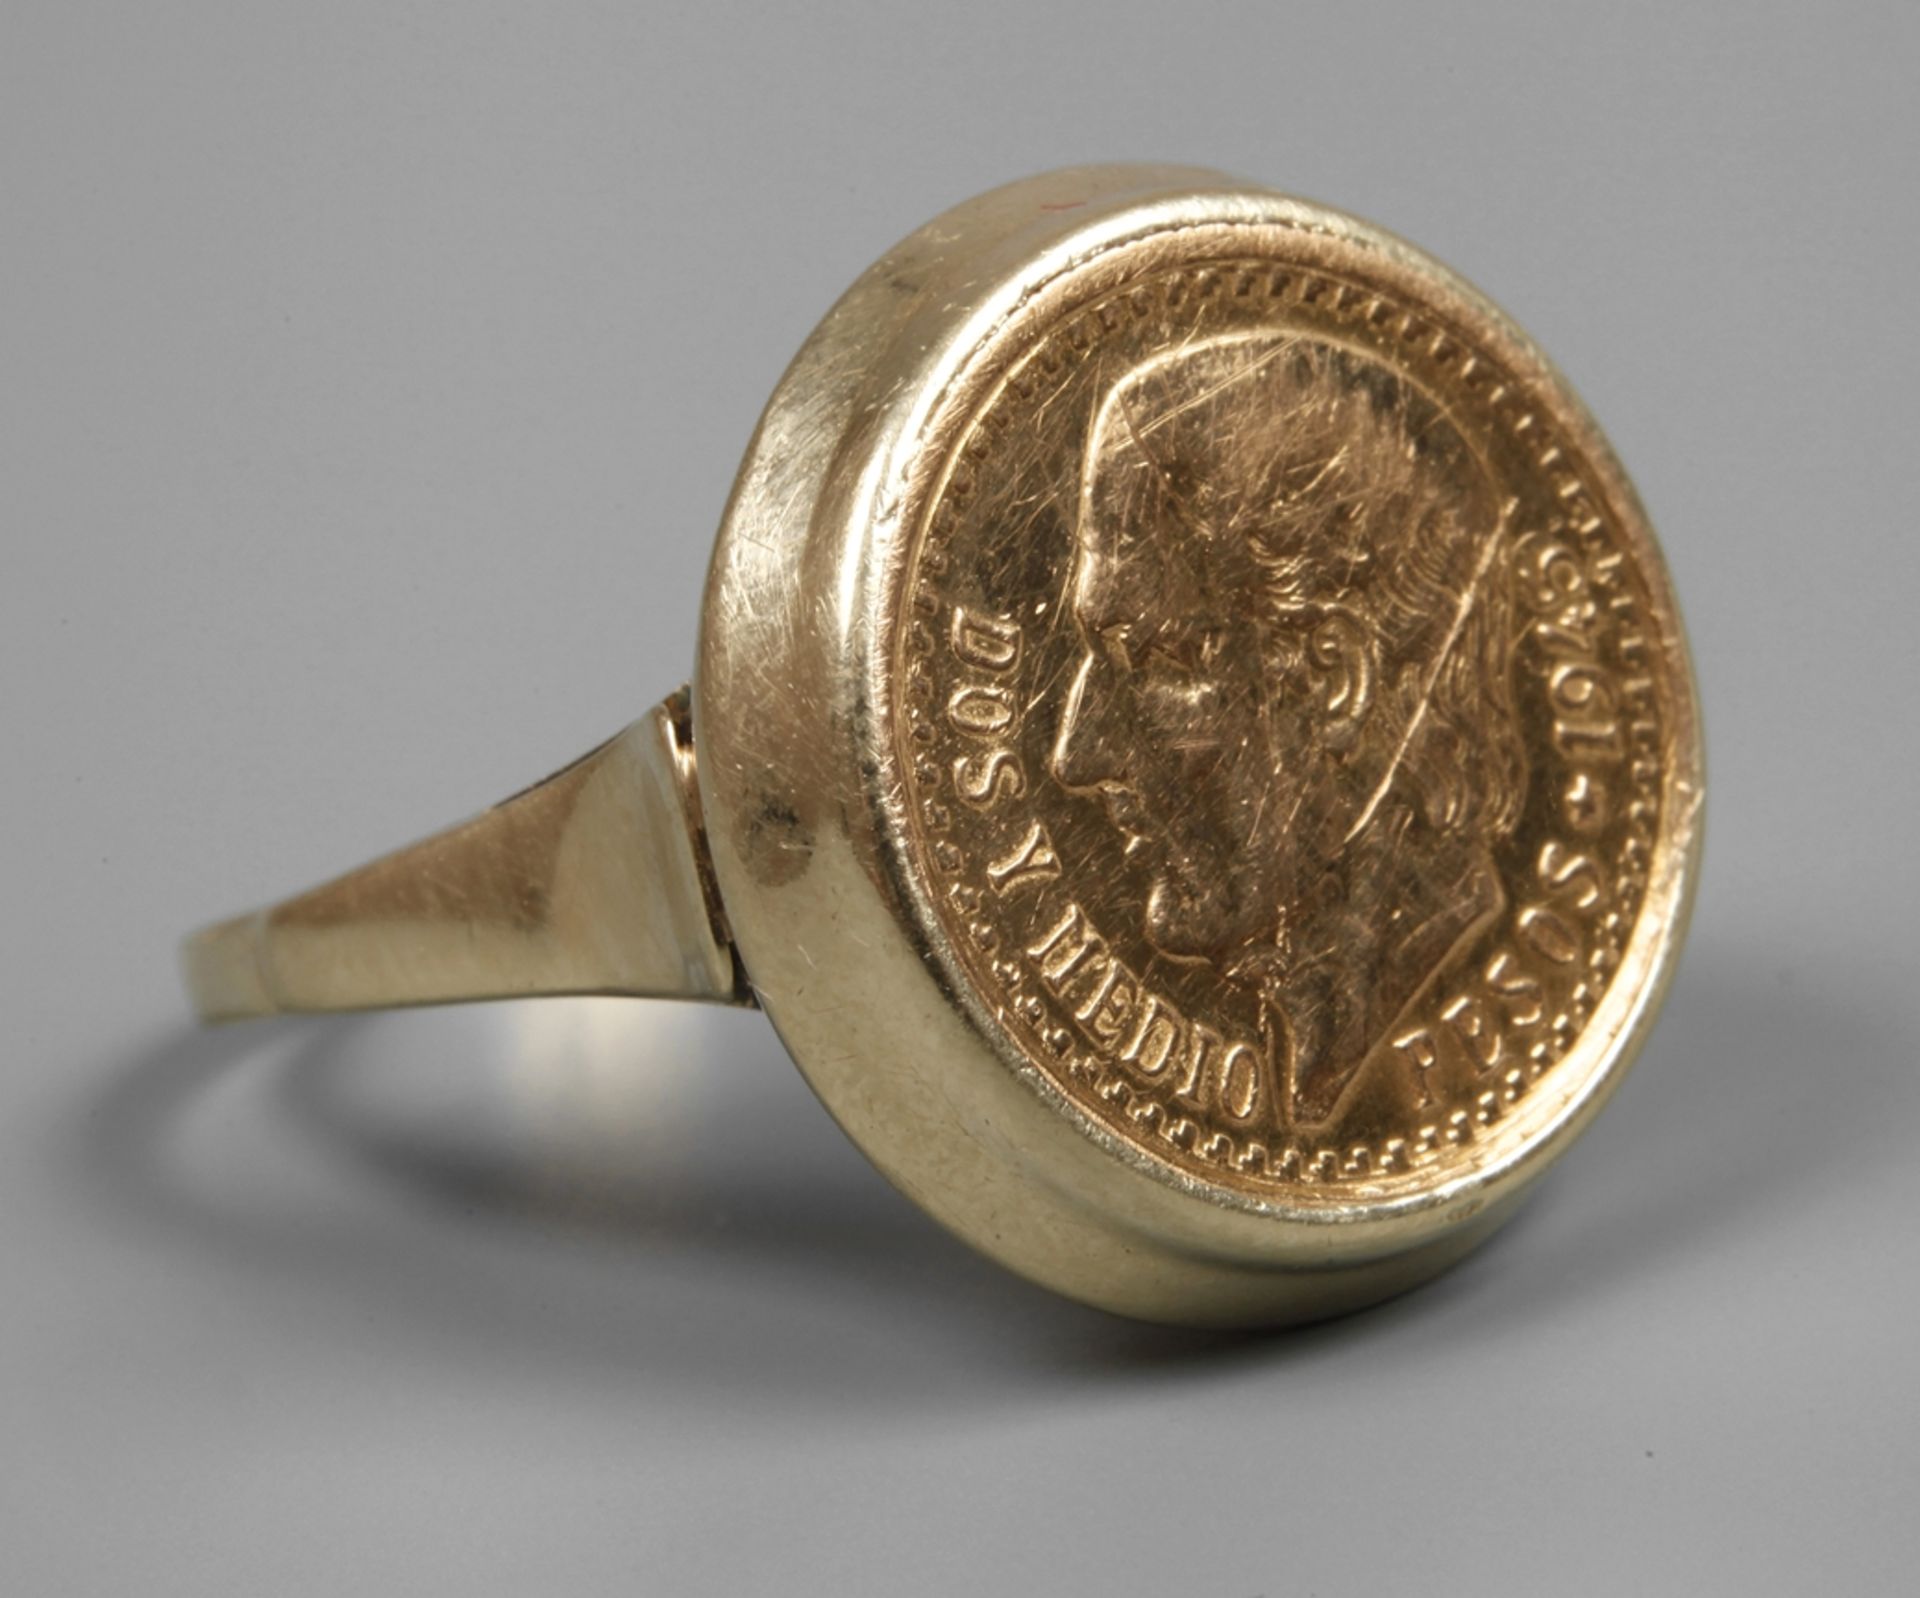 Coin ring